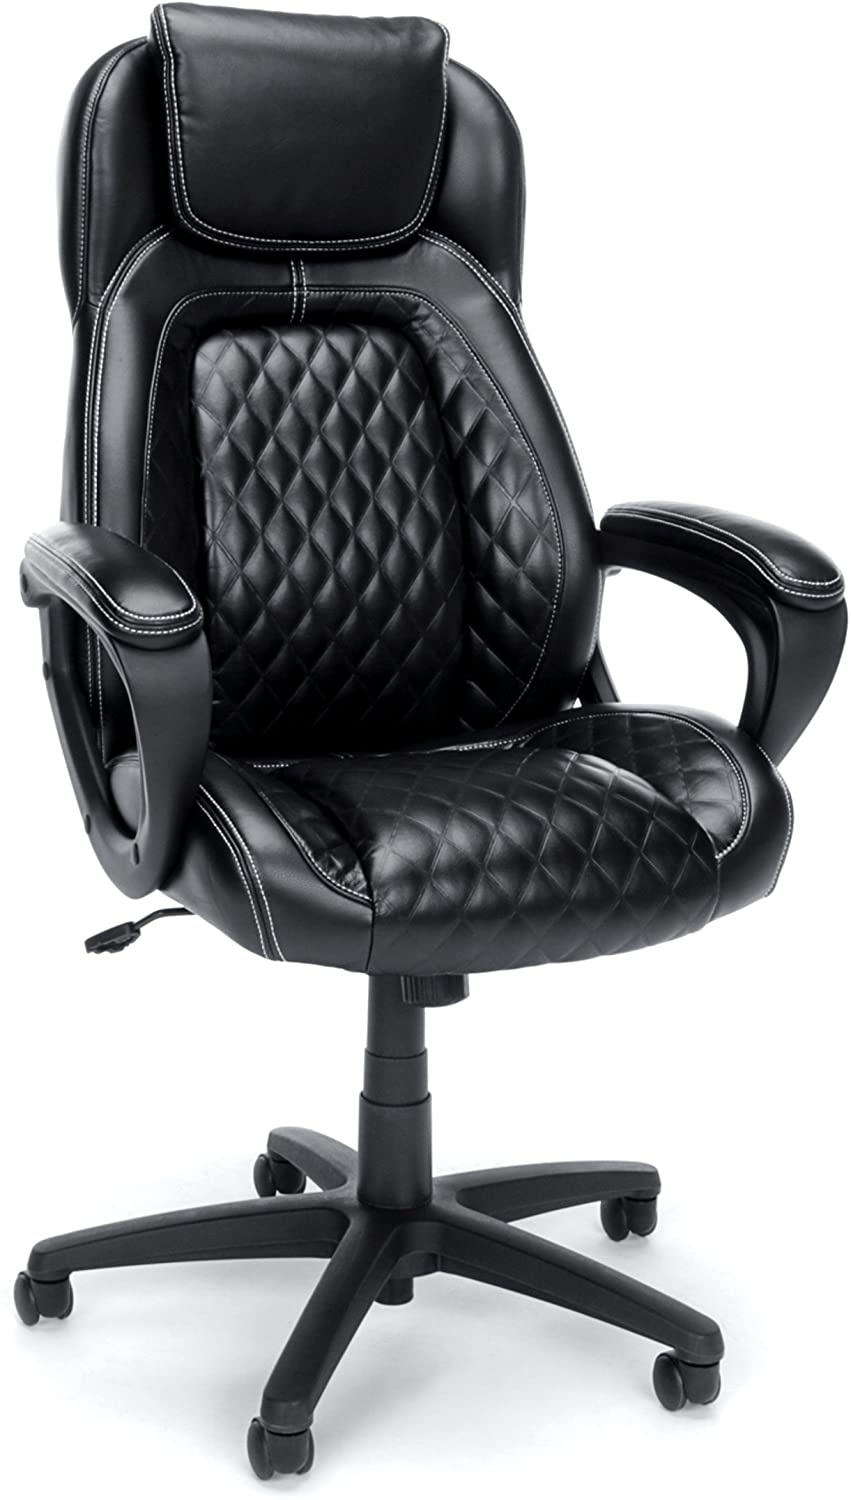 Photo 1 of OFM ESS Collection Racing Style SofThread Leather High Back Office Chair in Black ESS6060
USED DIRTY